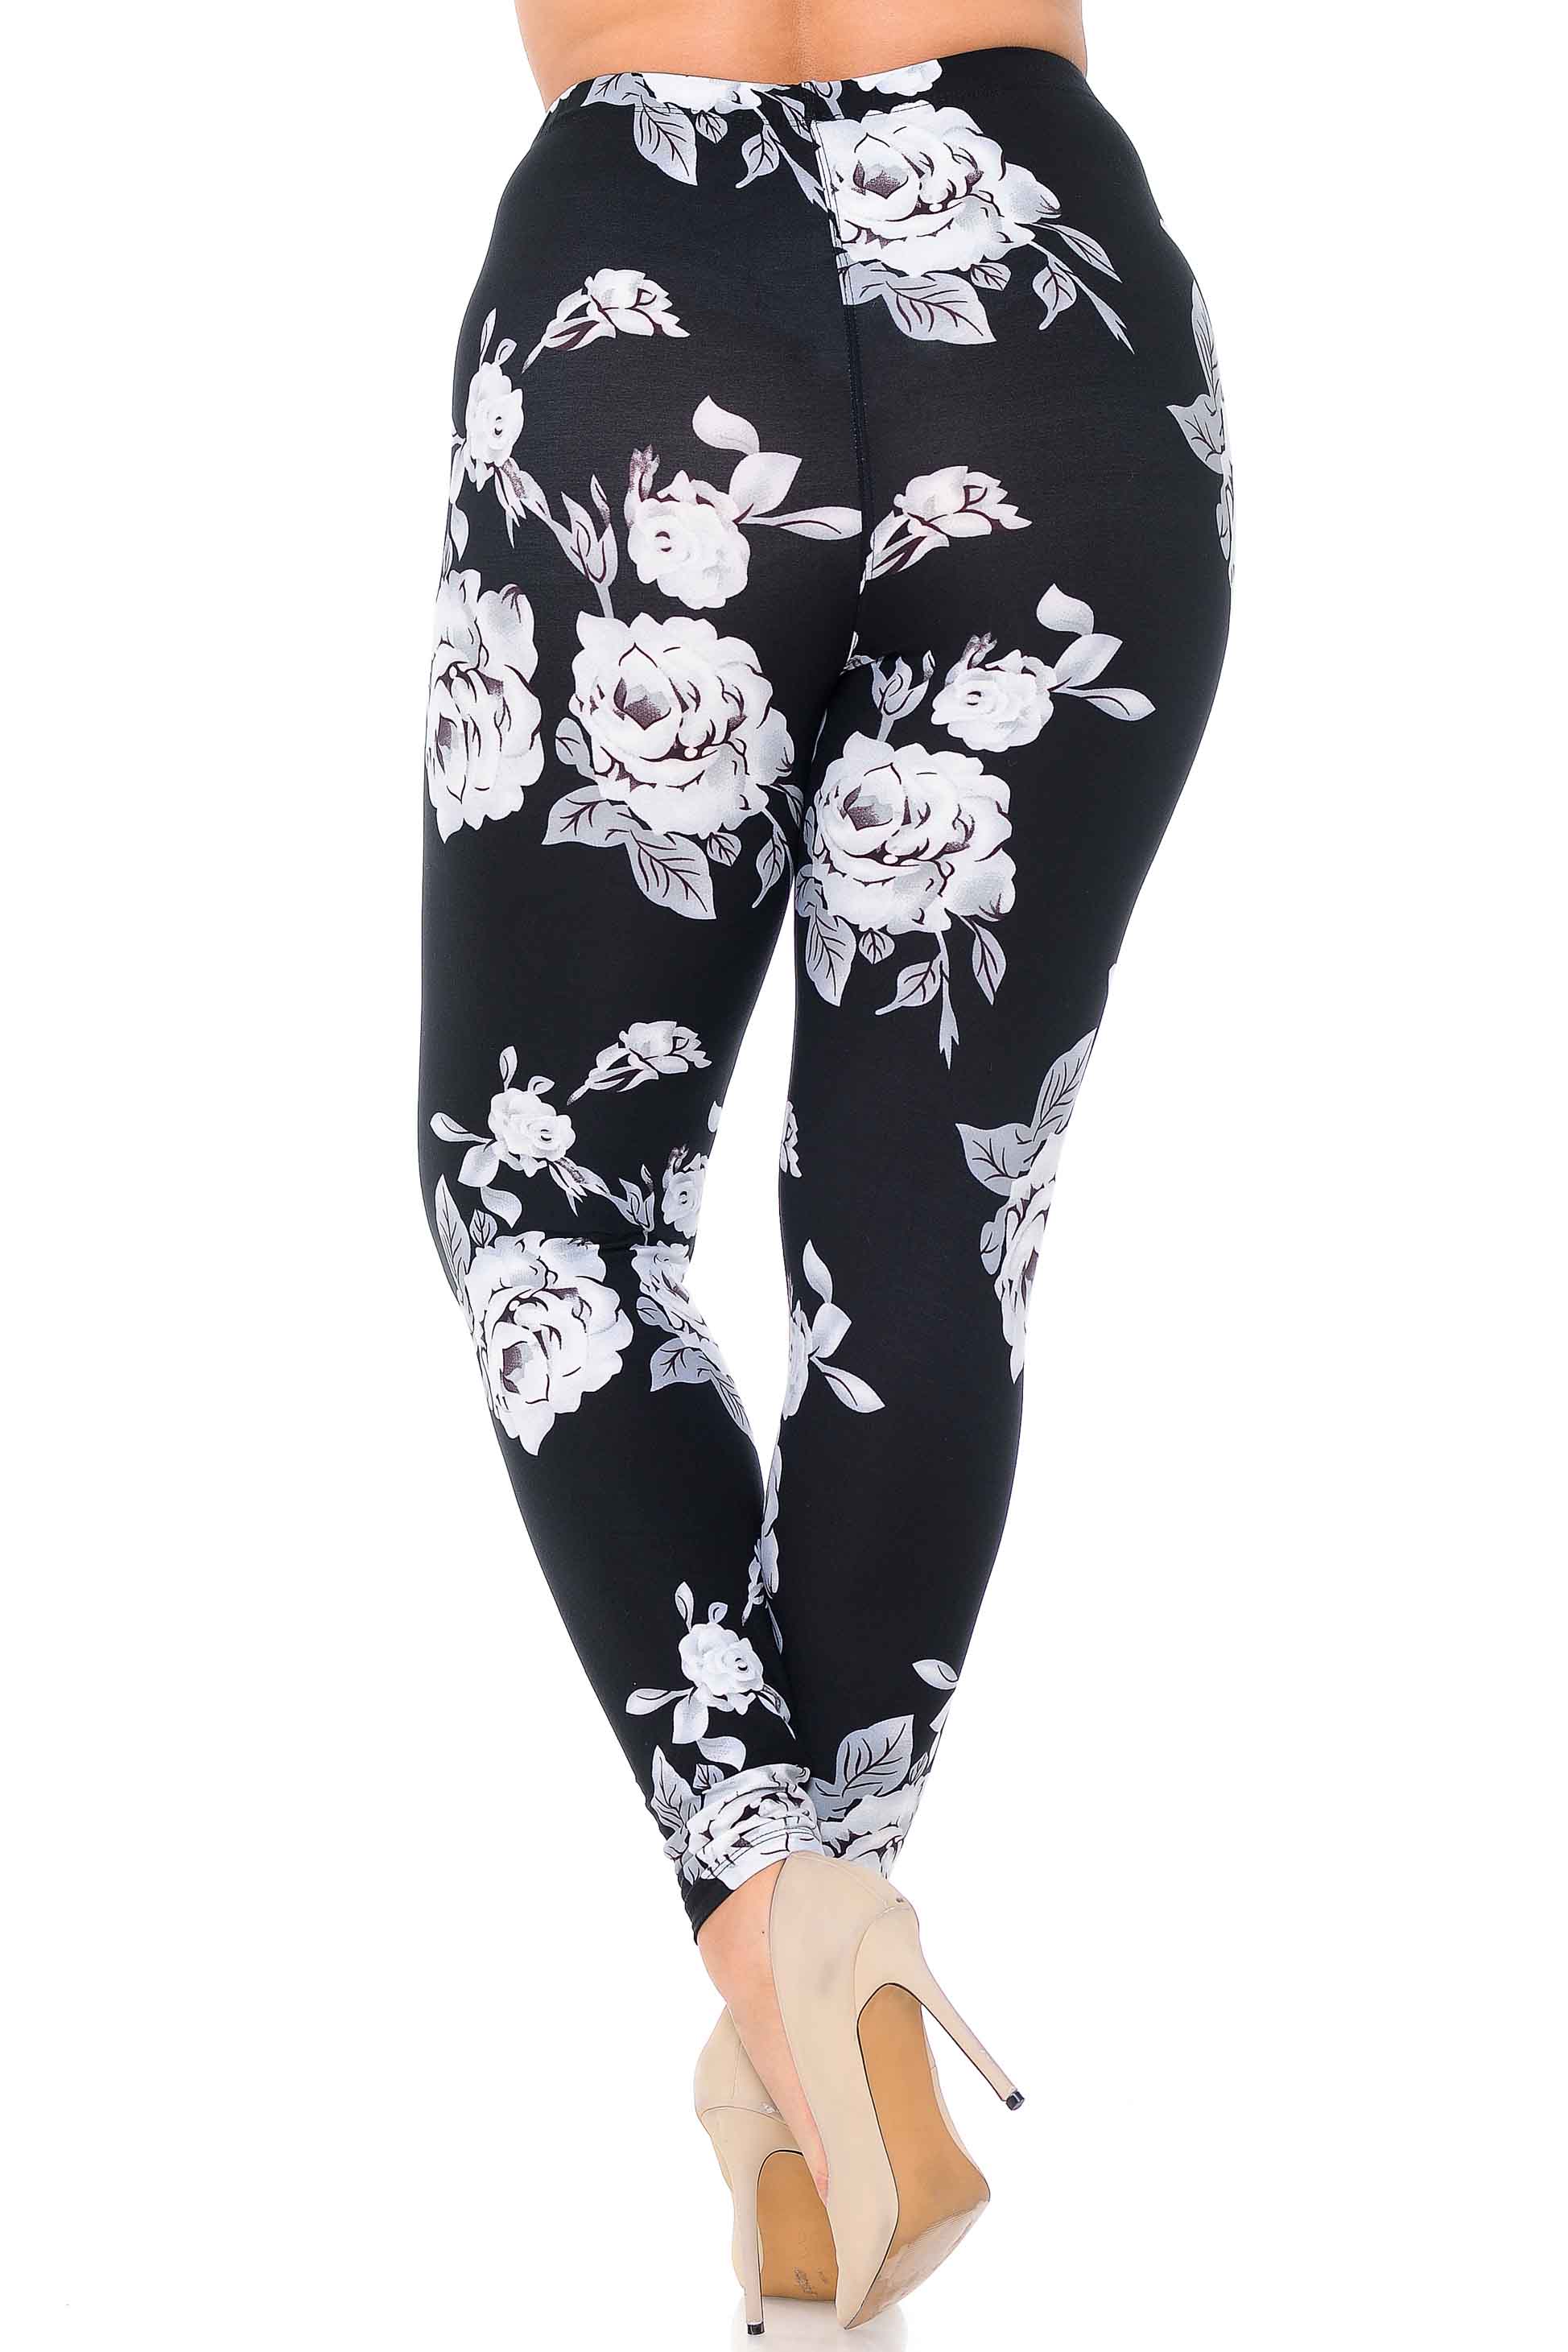 Wholesale Buttery Smooth Jumbo White Rose Extra Plus Size Leggings - 3X - 5X